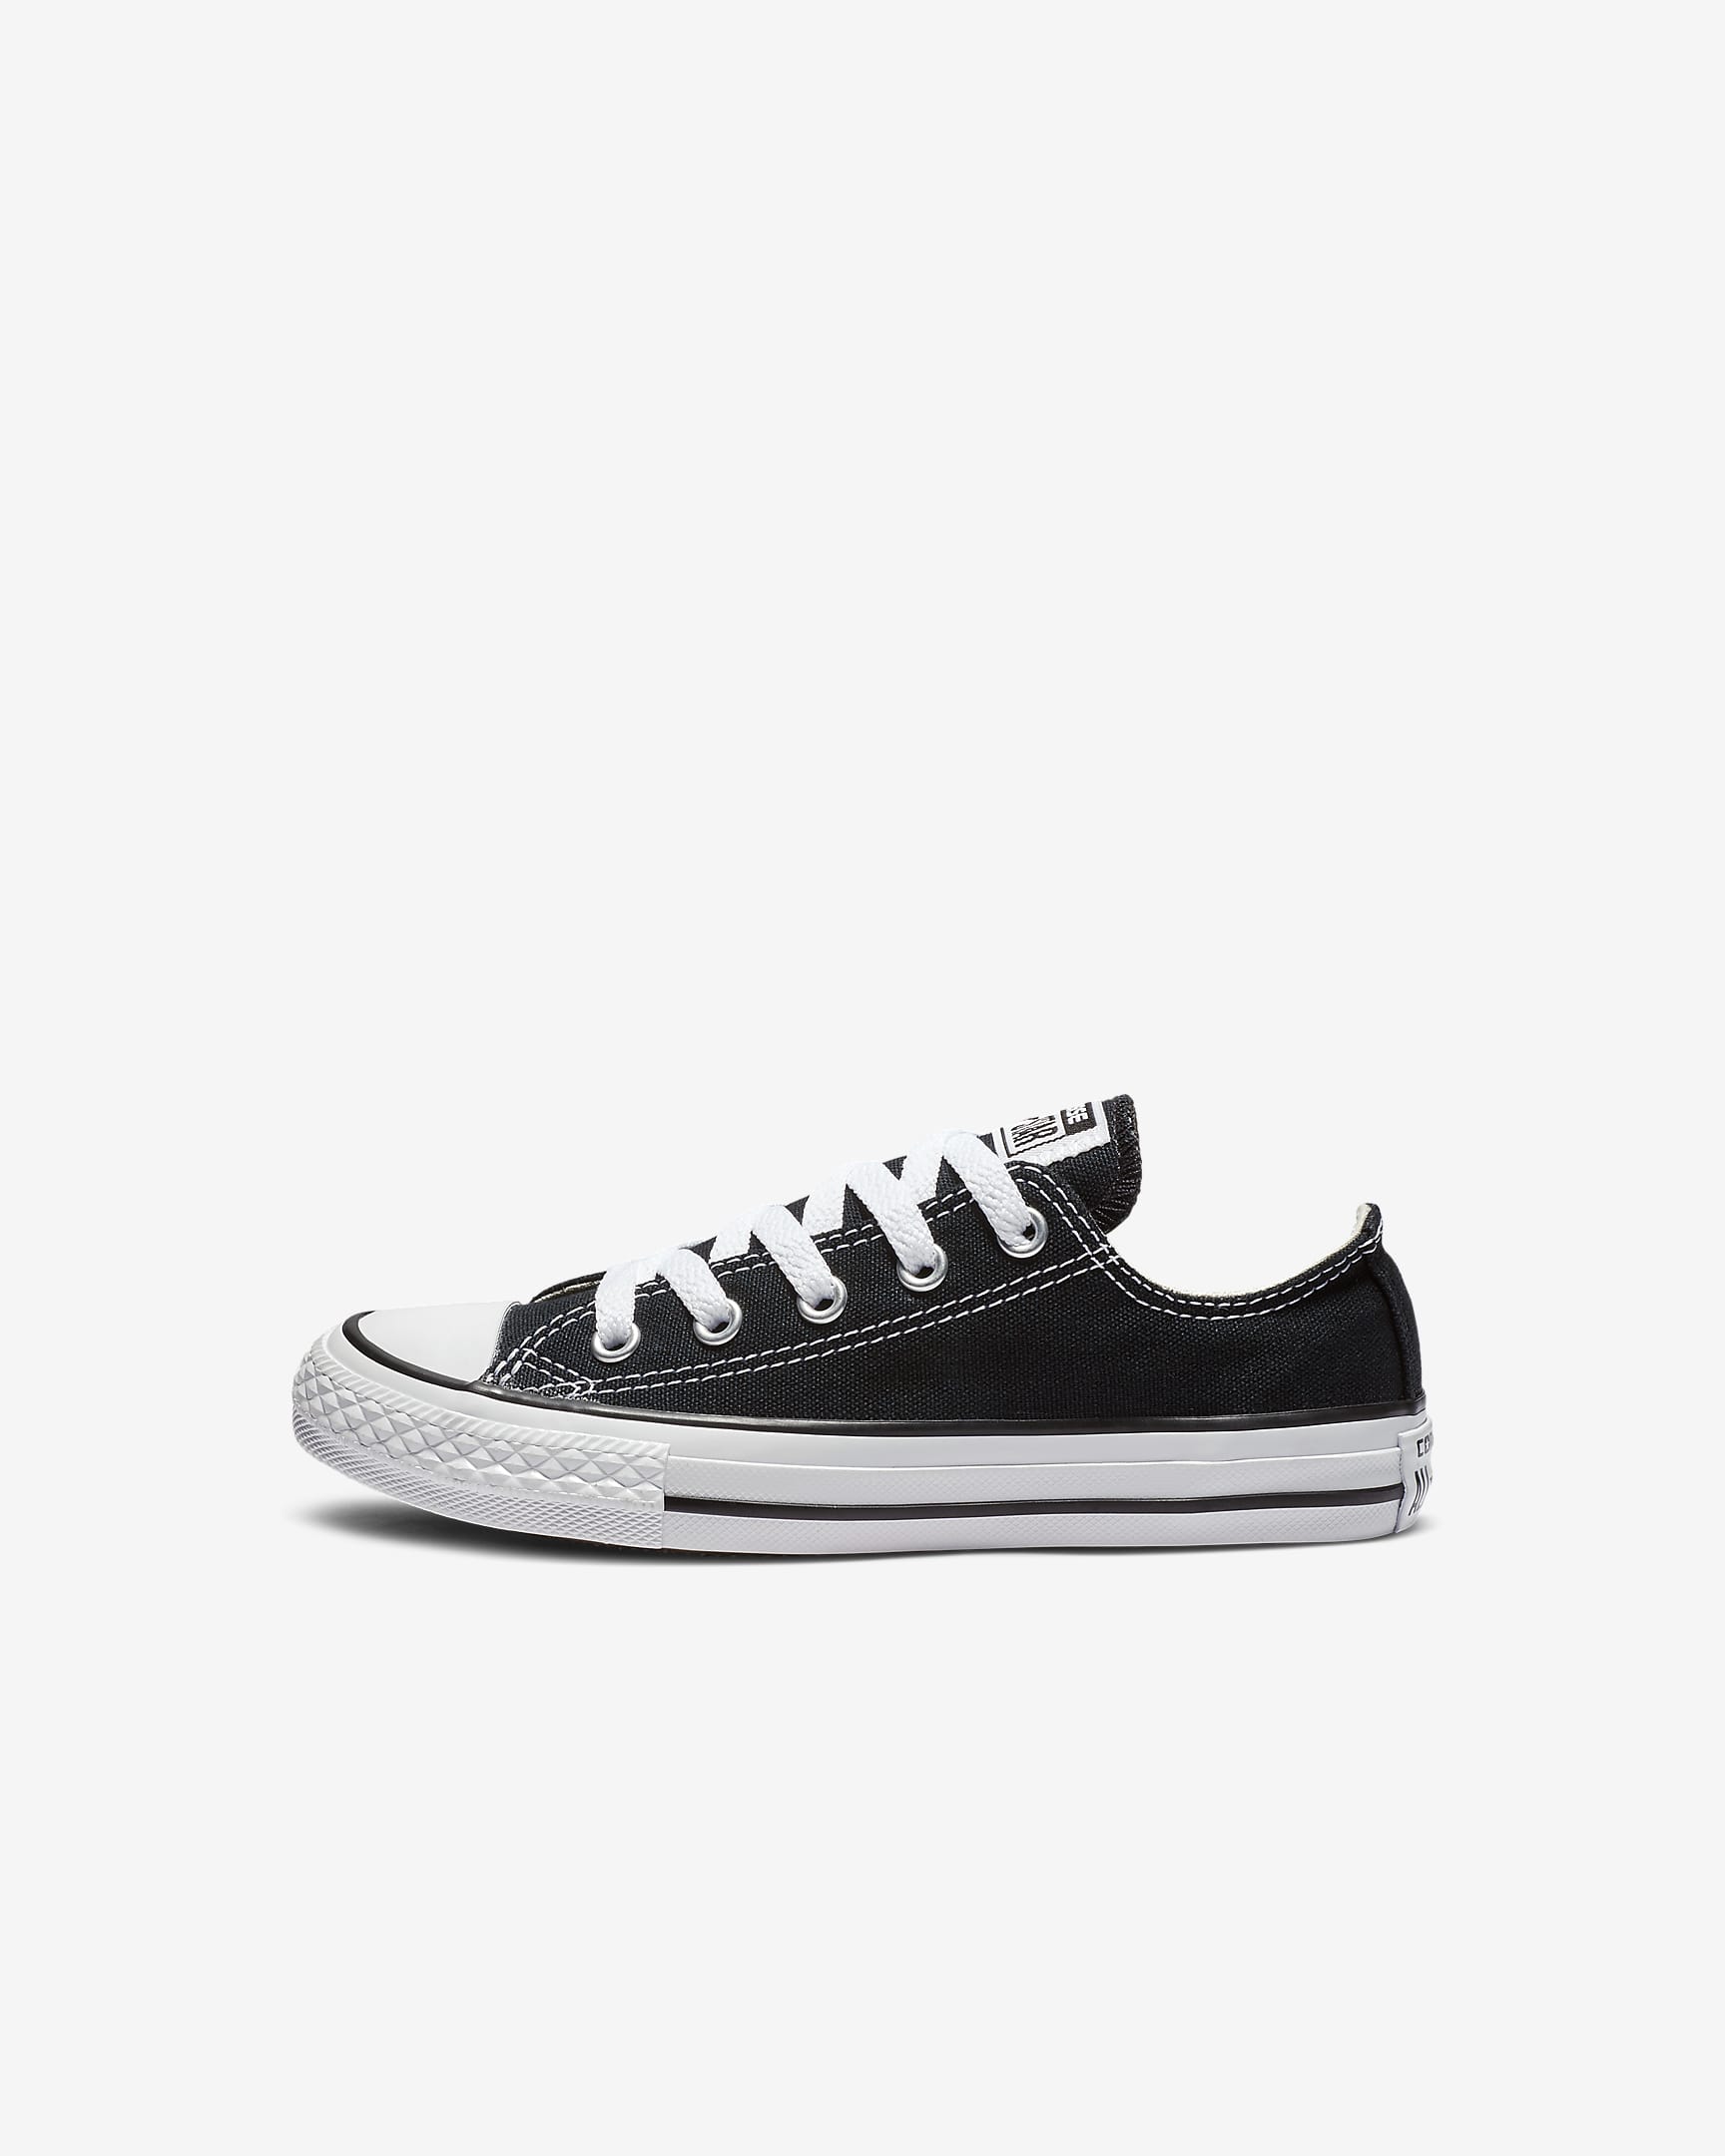 Converse Chuck Taylor All Star Low Top Little Kids' Shoes. Nike.com